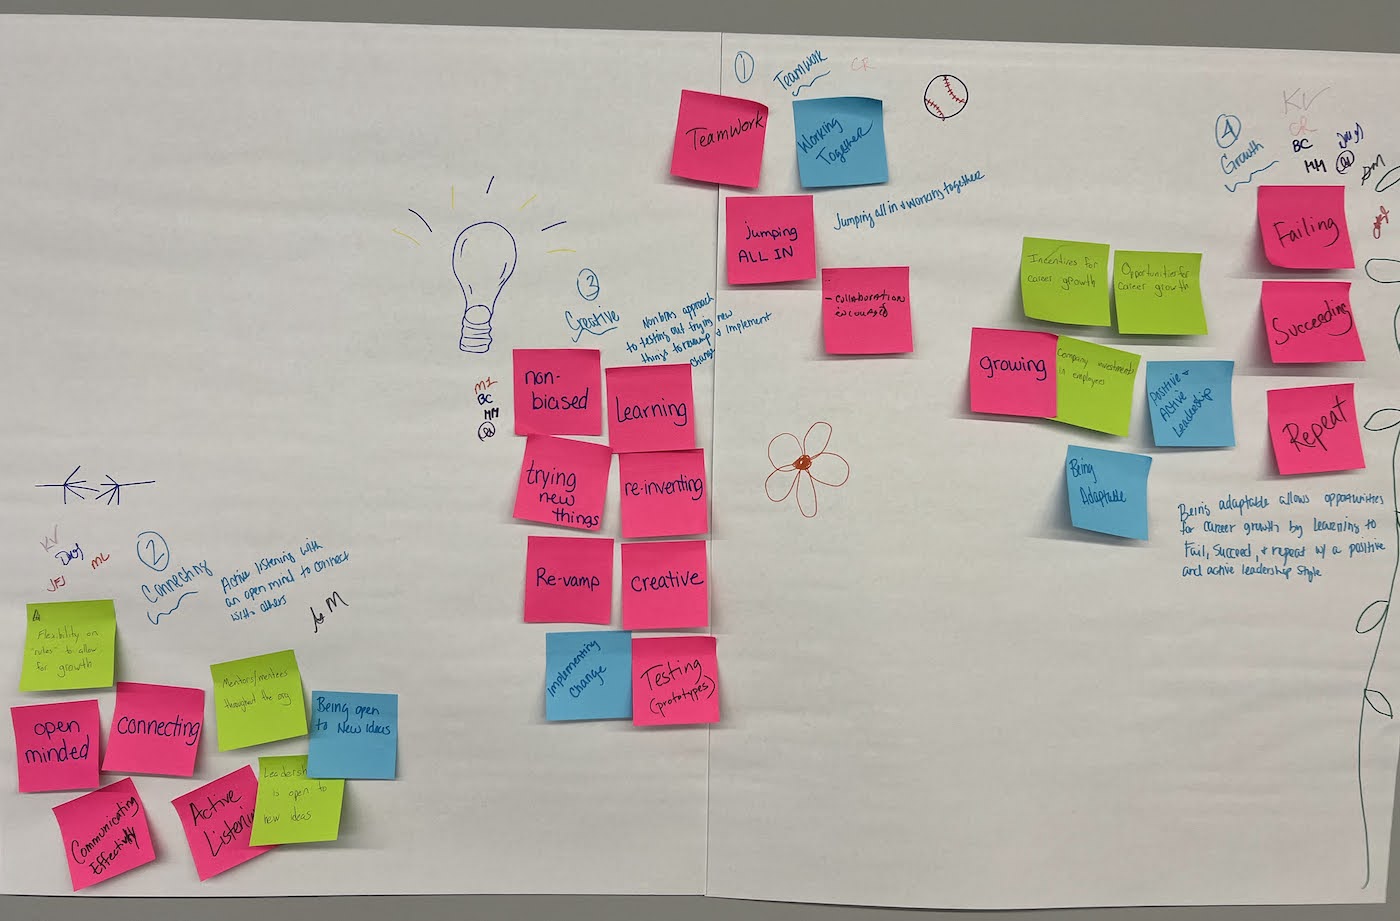 Leading a Culture of Innovation with Design Thinking Facilitation